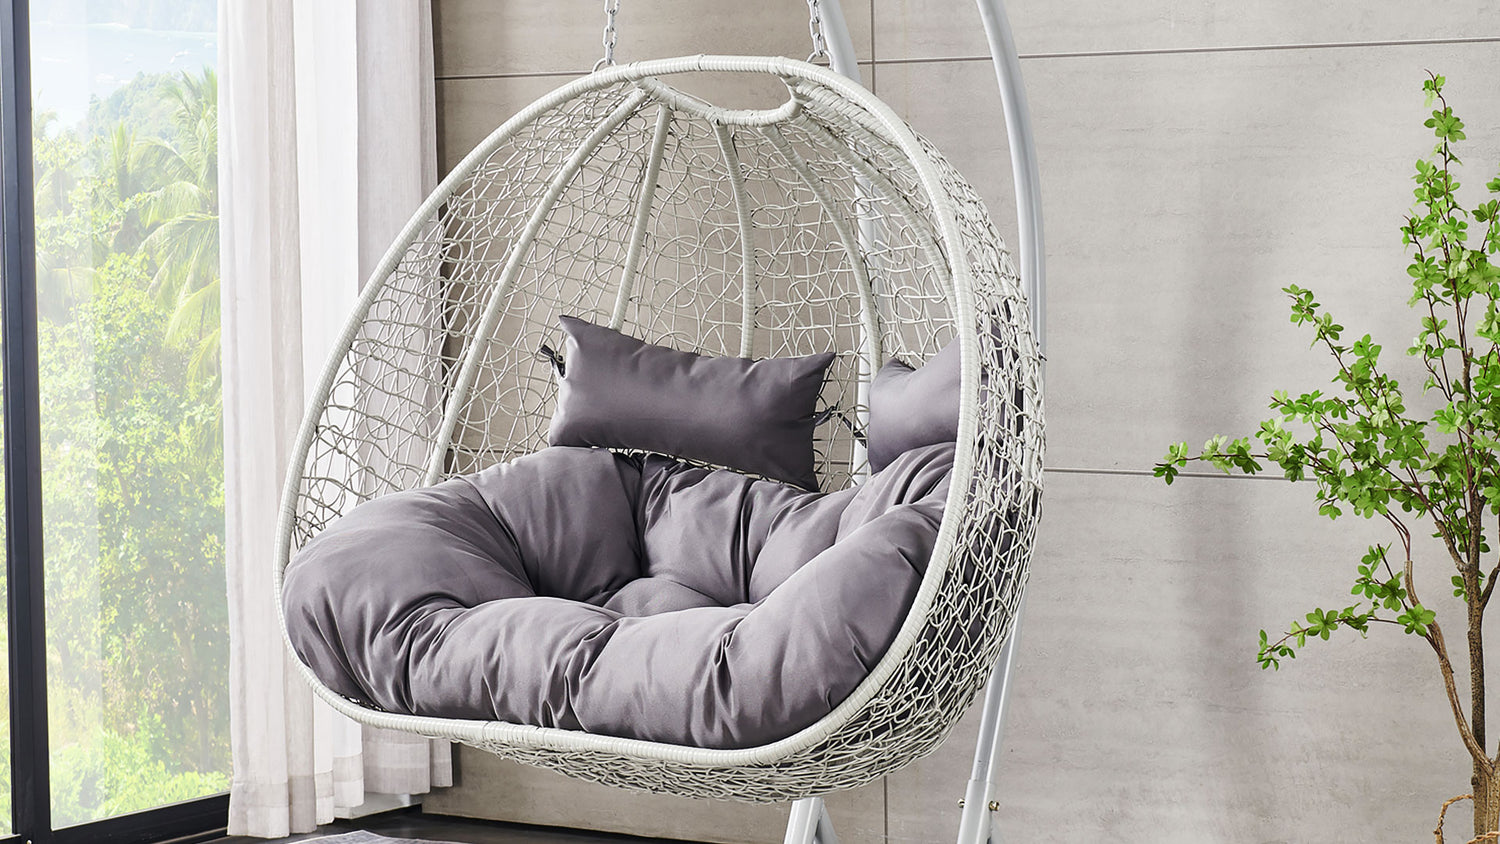 Enhance Your Garden's Aesthetic with Stylish Egg Chairs